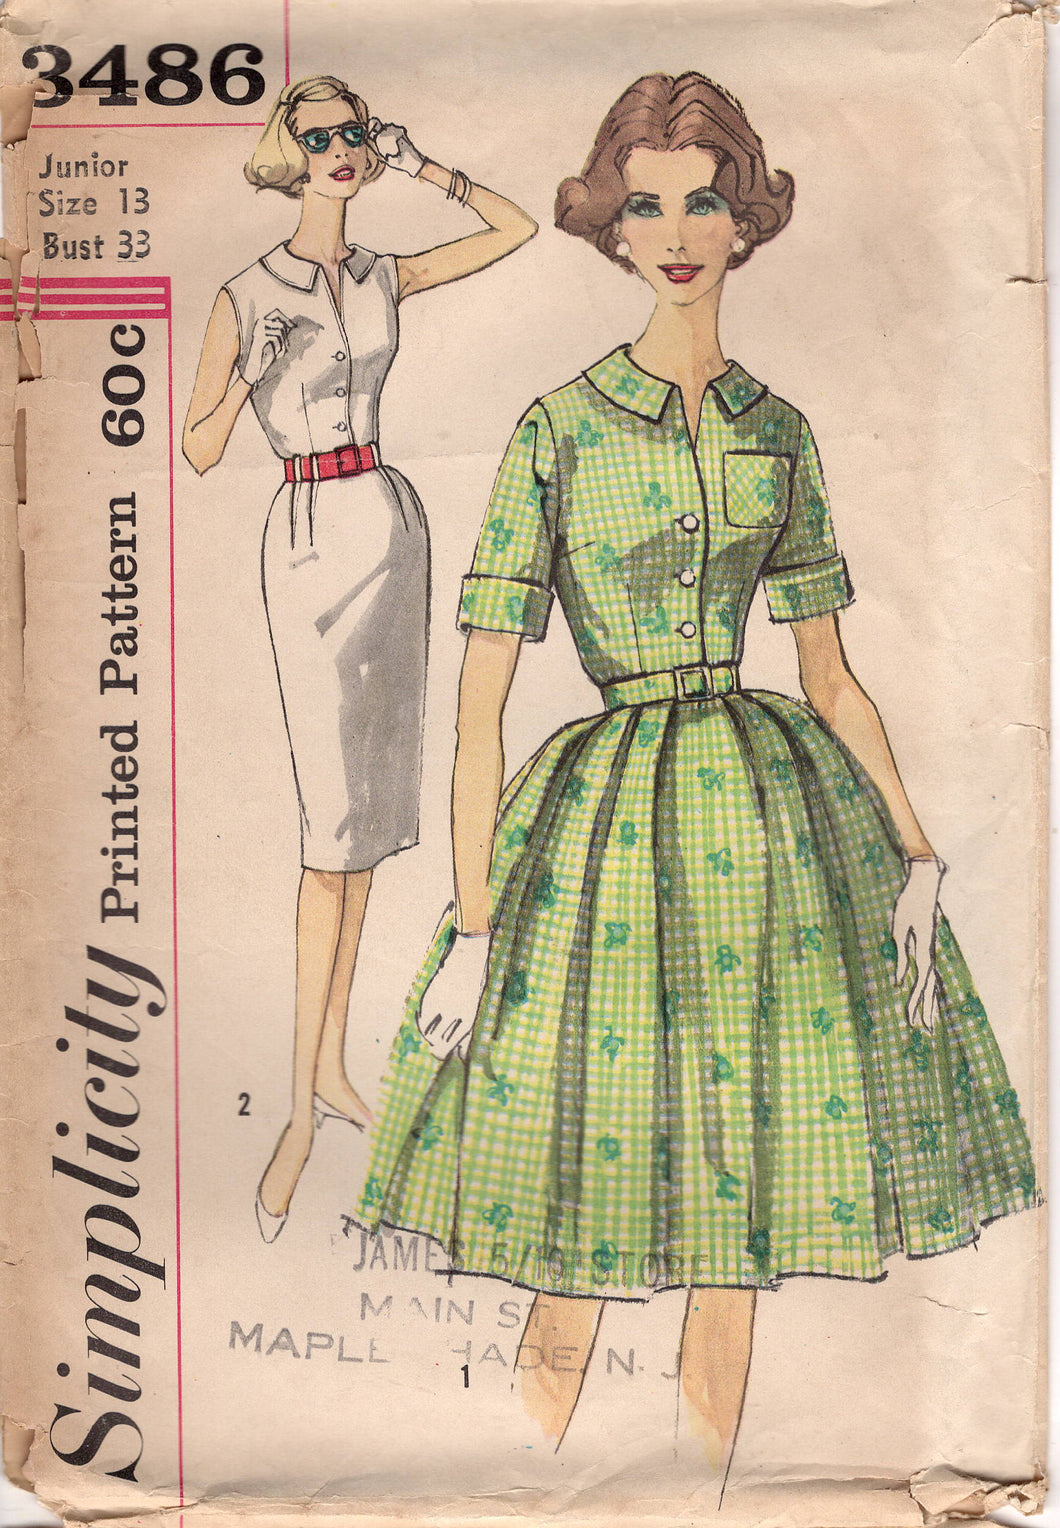 1960's Simplicity Misses' One-Piece Dress pattern with two skirts - Bust 33